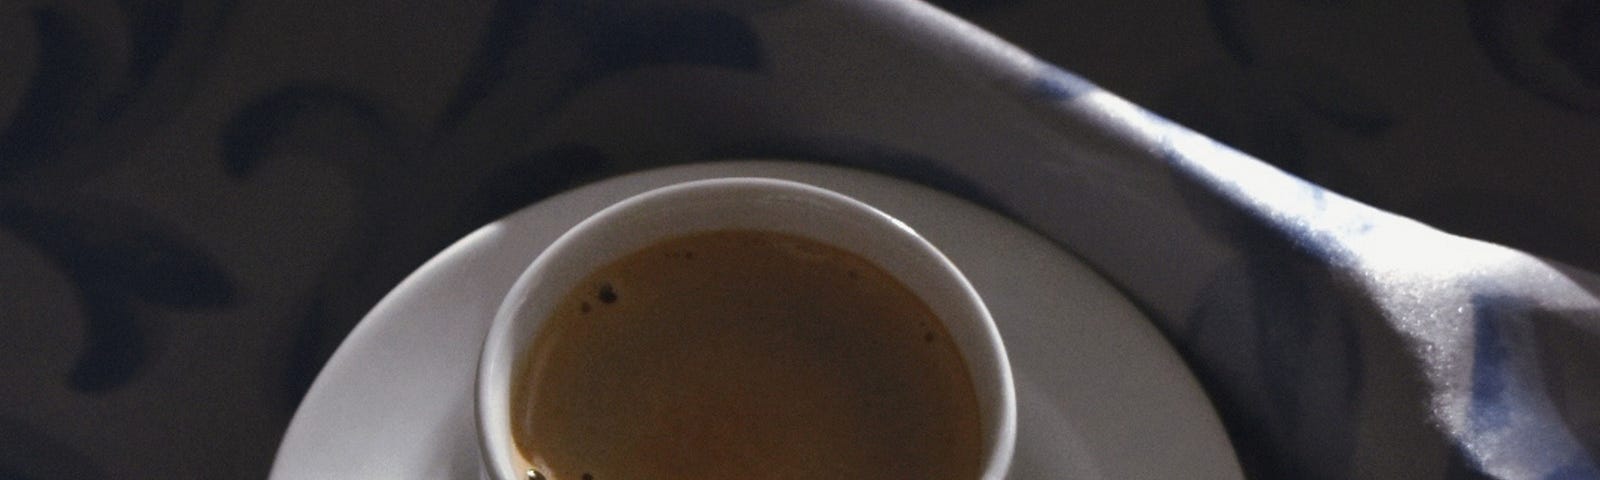 https://www.pexels.com/photo/a-cup-of-coffee-on-the-bed-18395621/